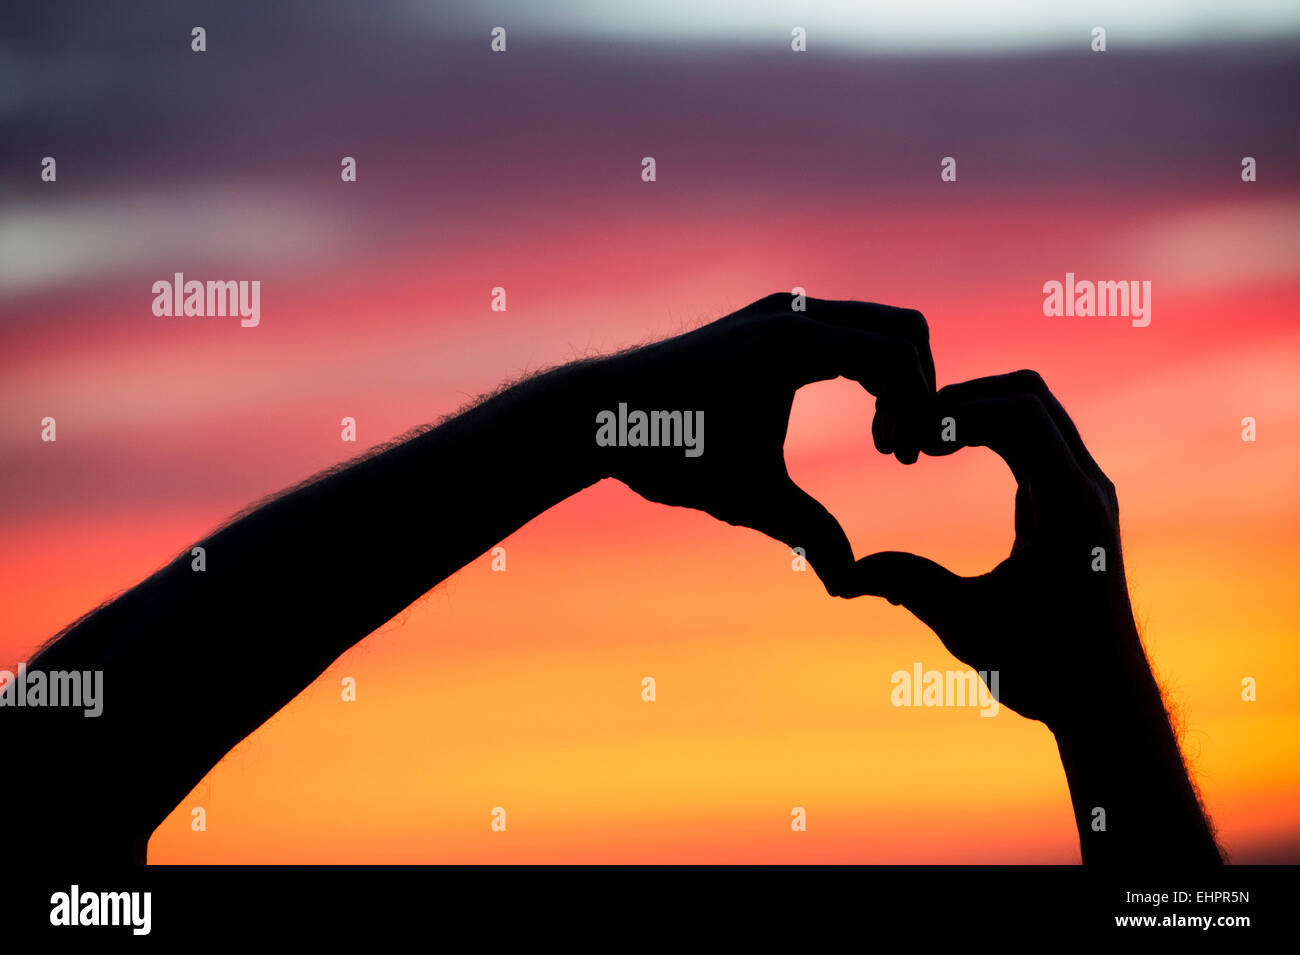 Heart hands gesture at sunrise. Silhouette Stock Photo